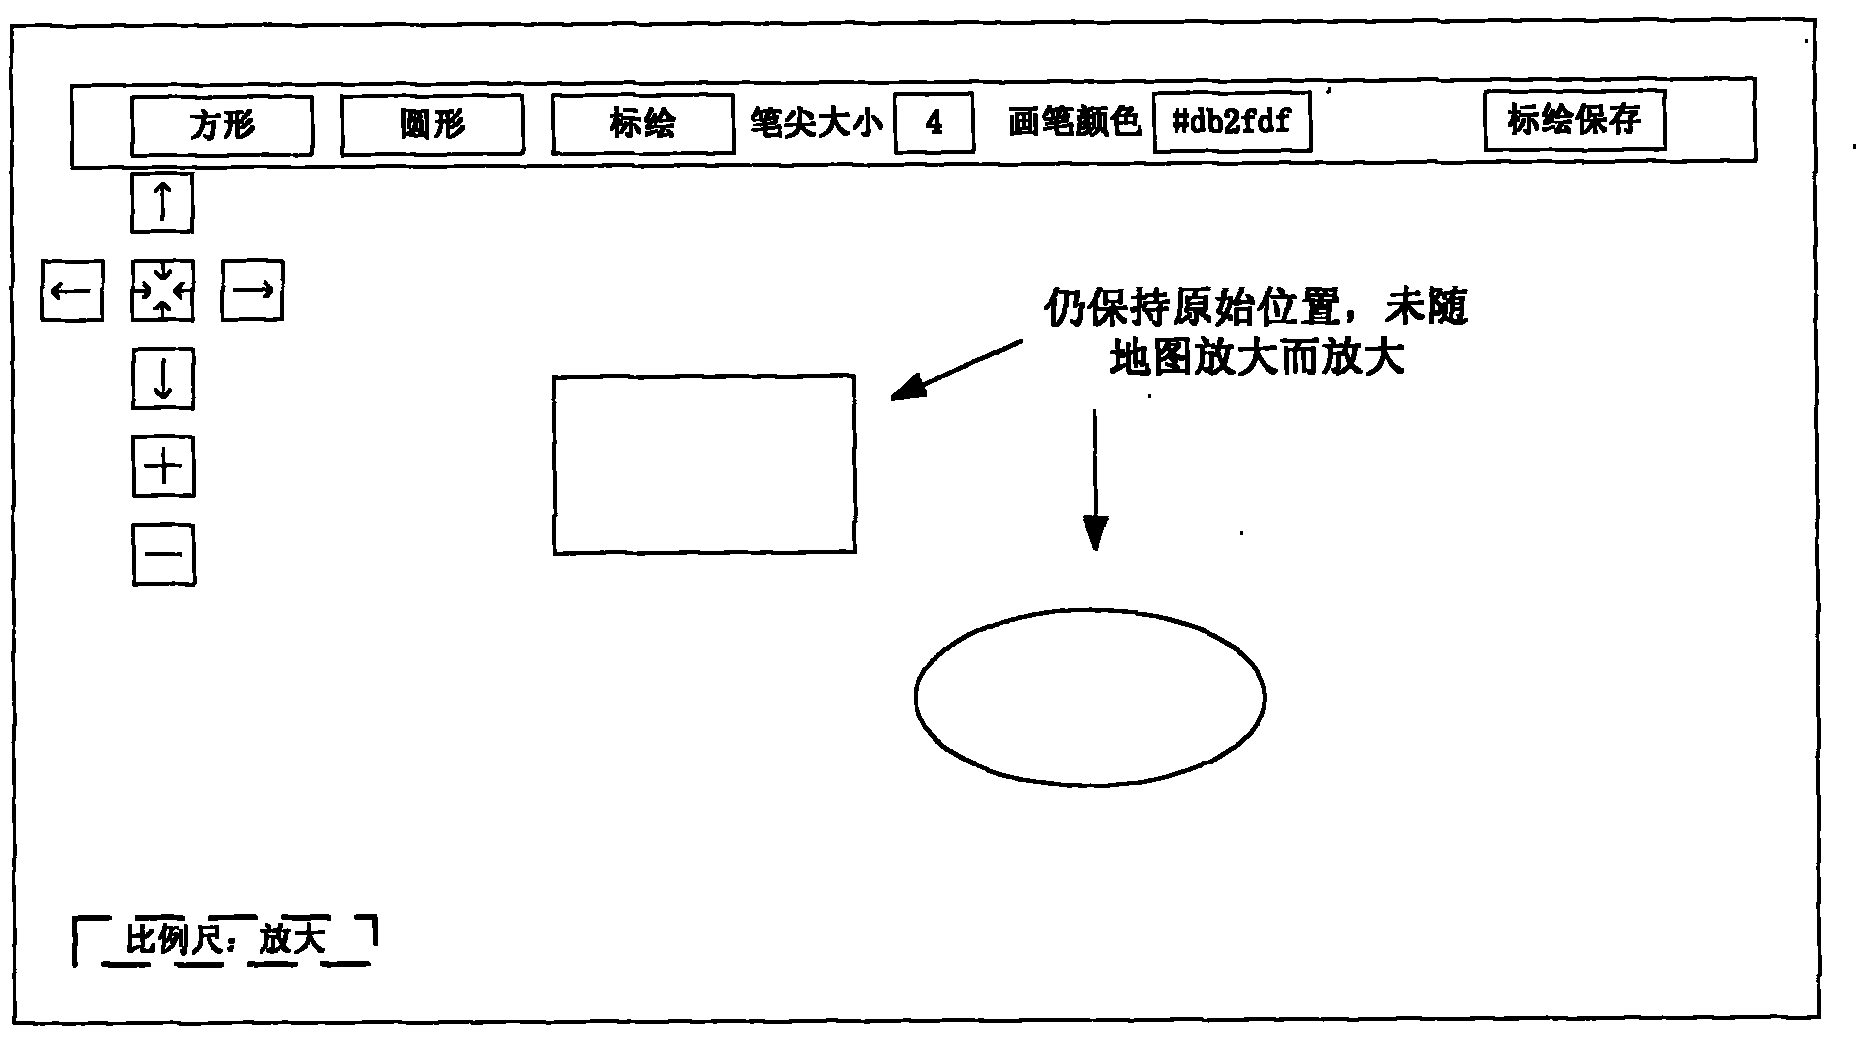 Visualization plotting method and system based on geographic information system